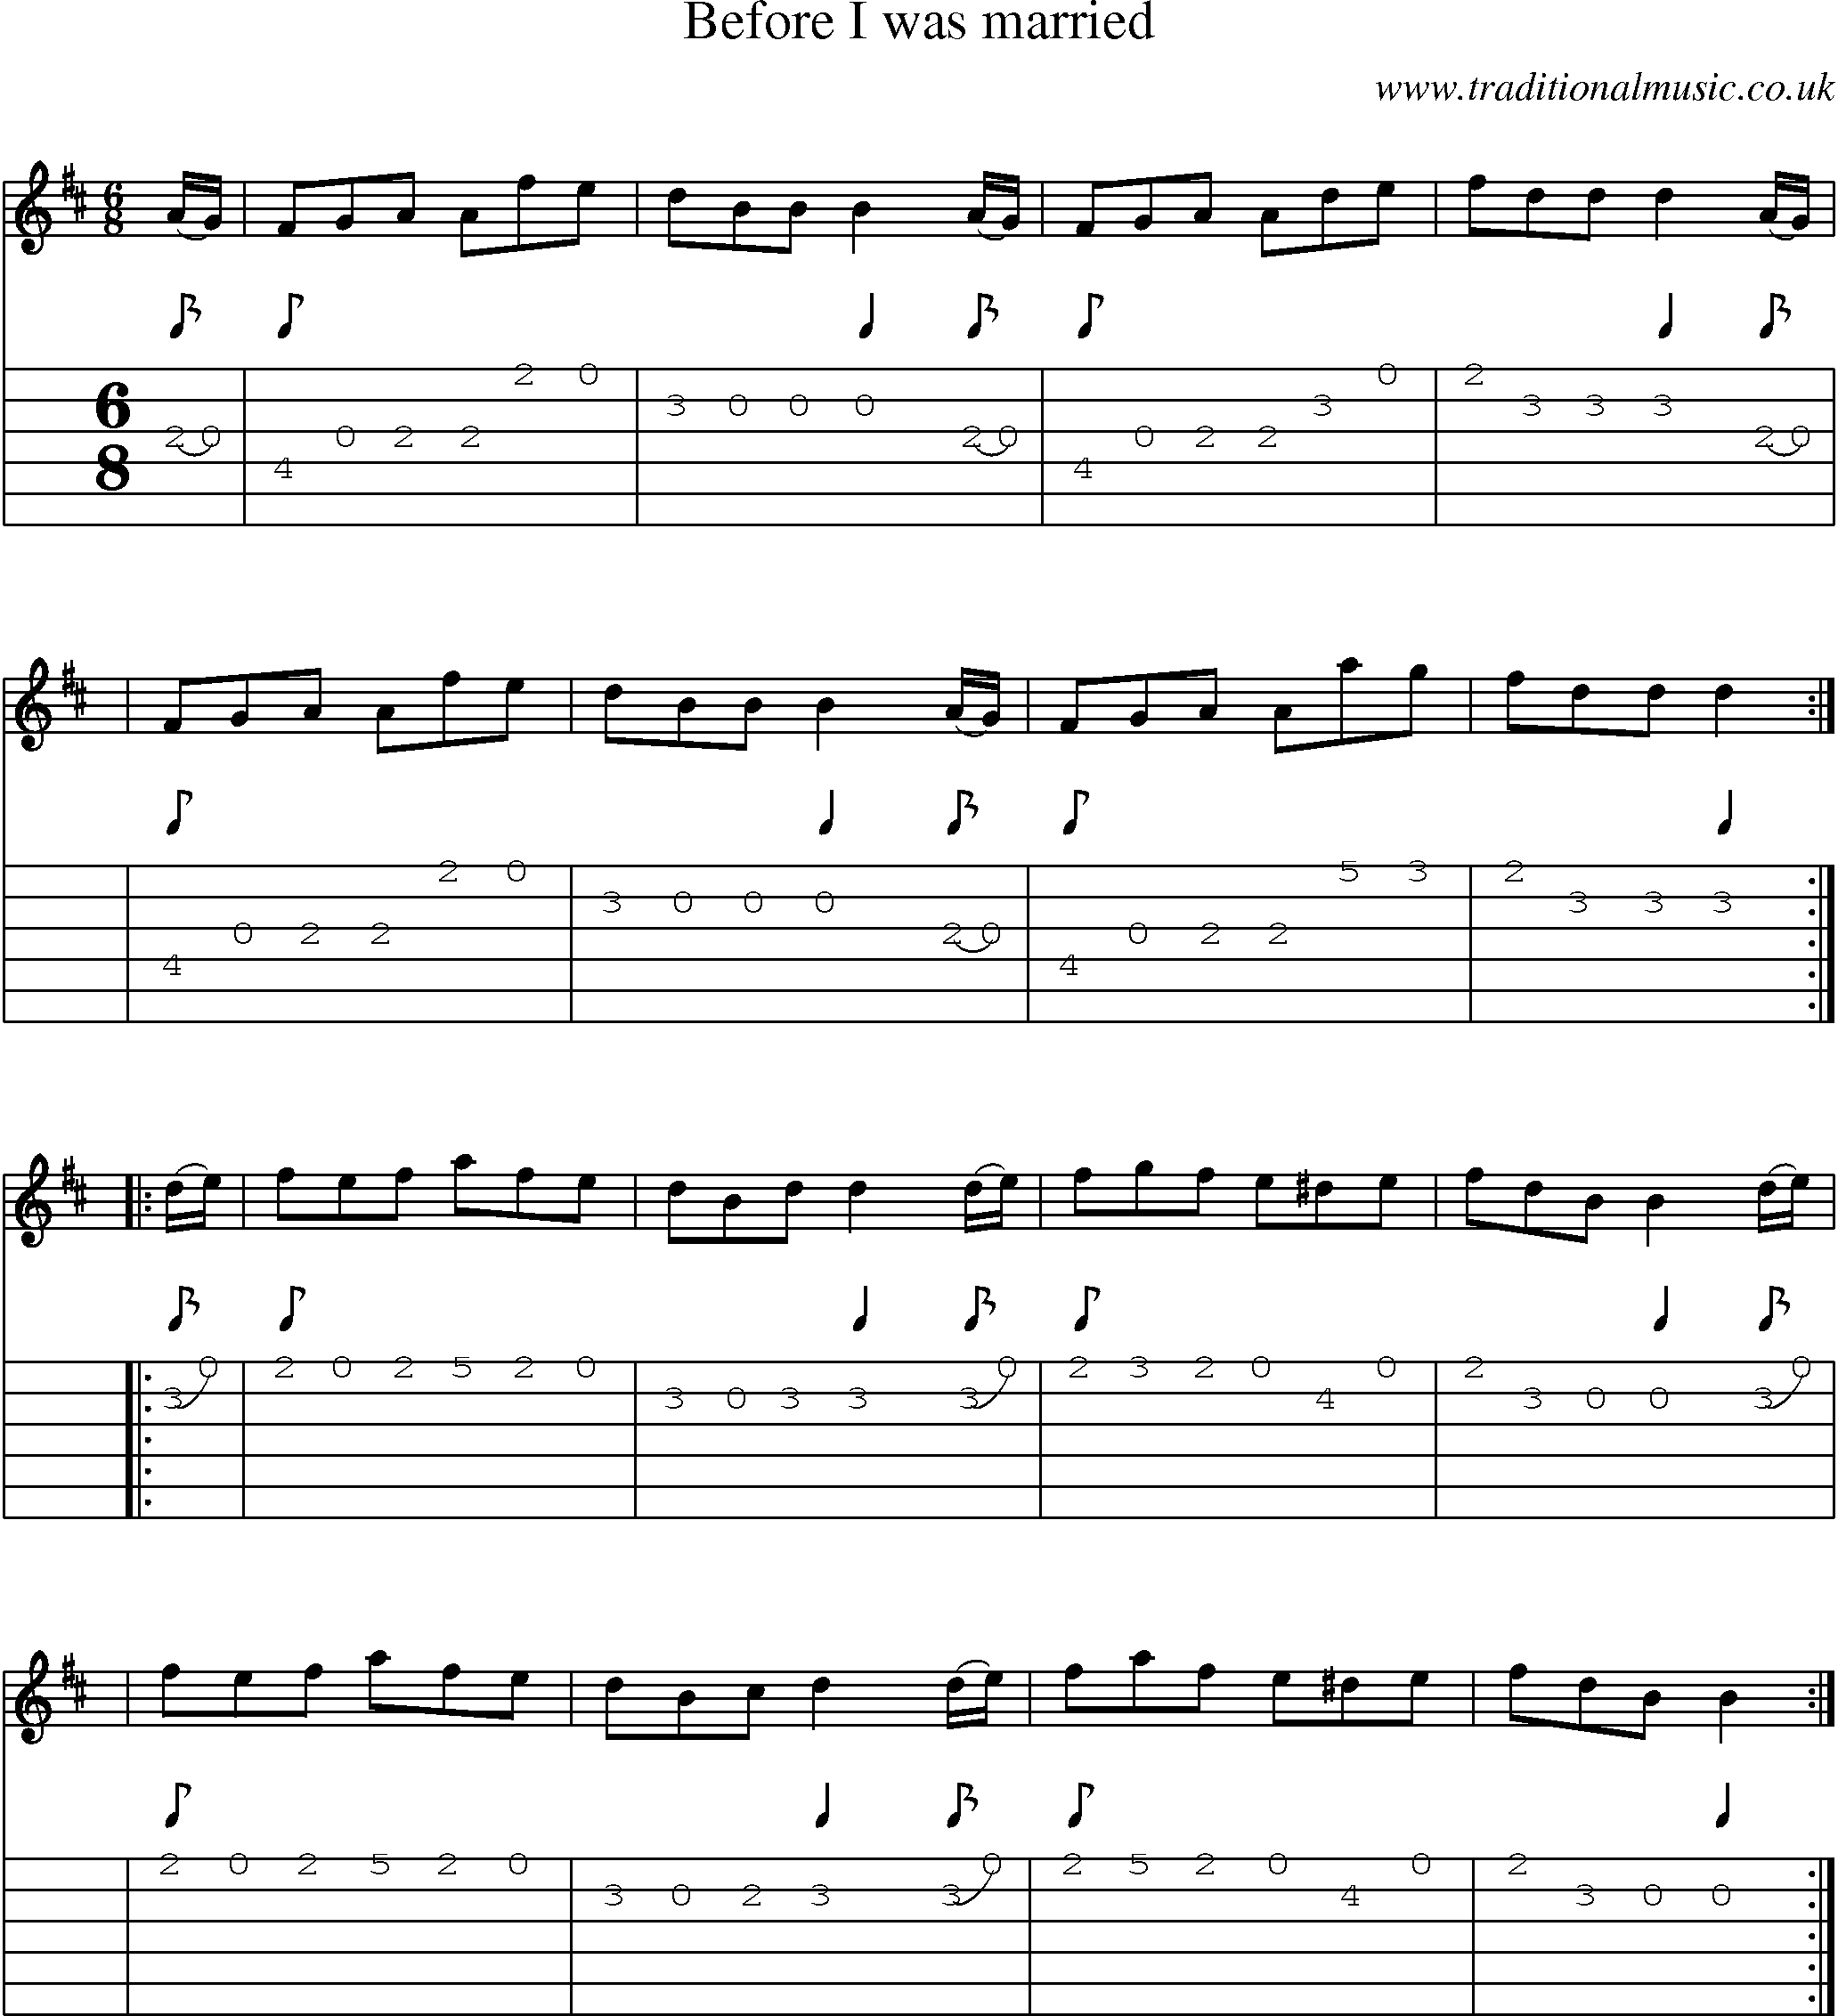 Music Score and Guitar Tabs for Before I Was Married